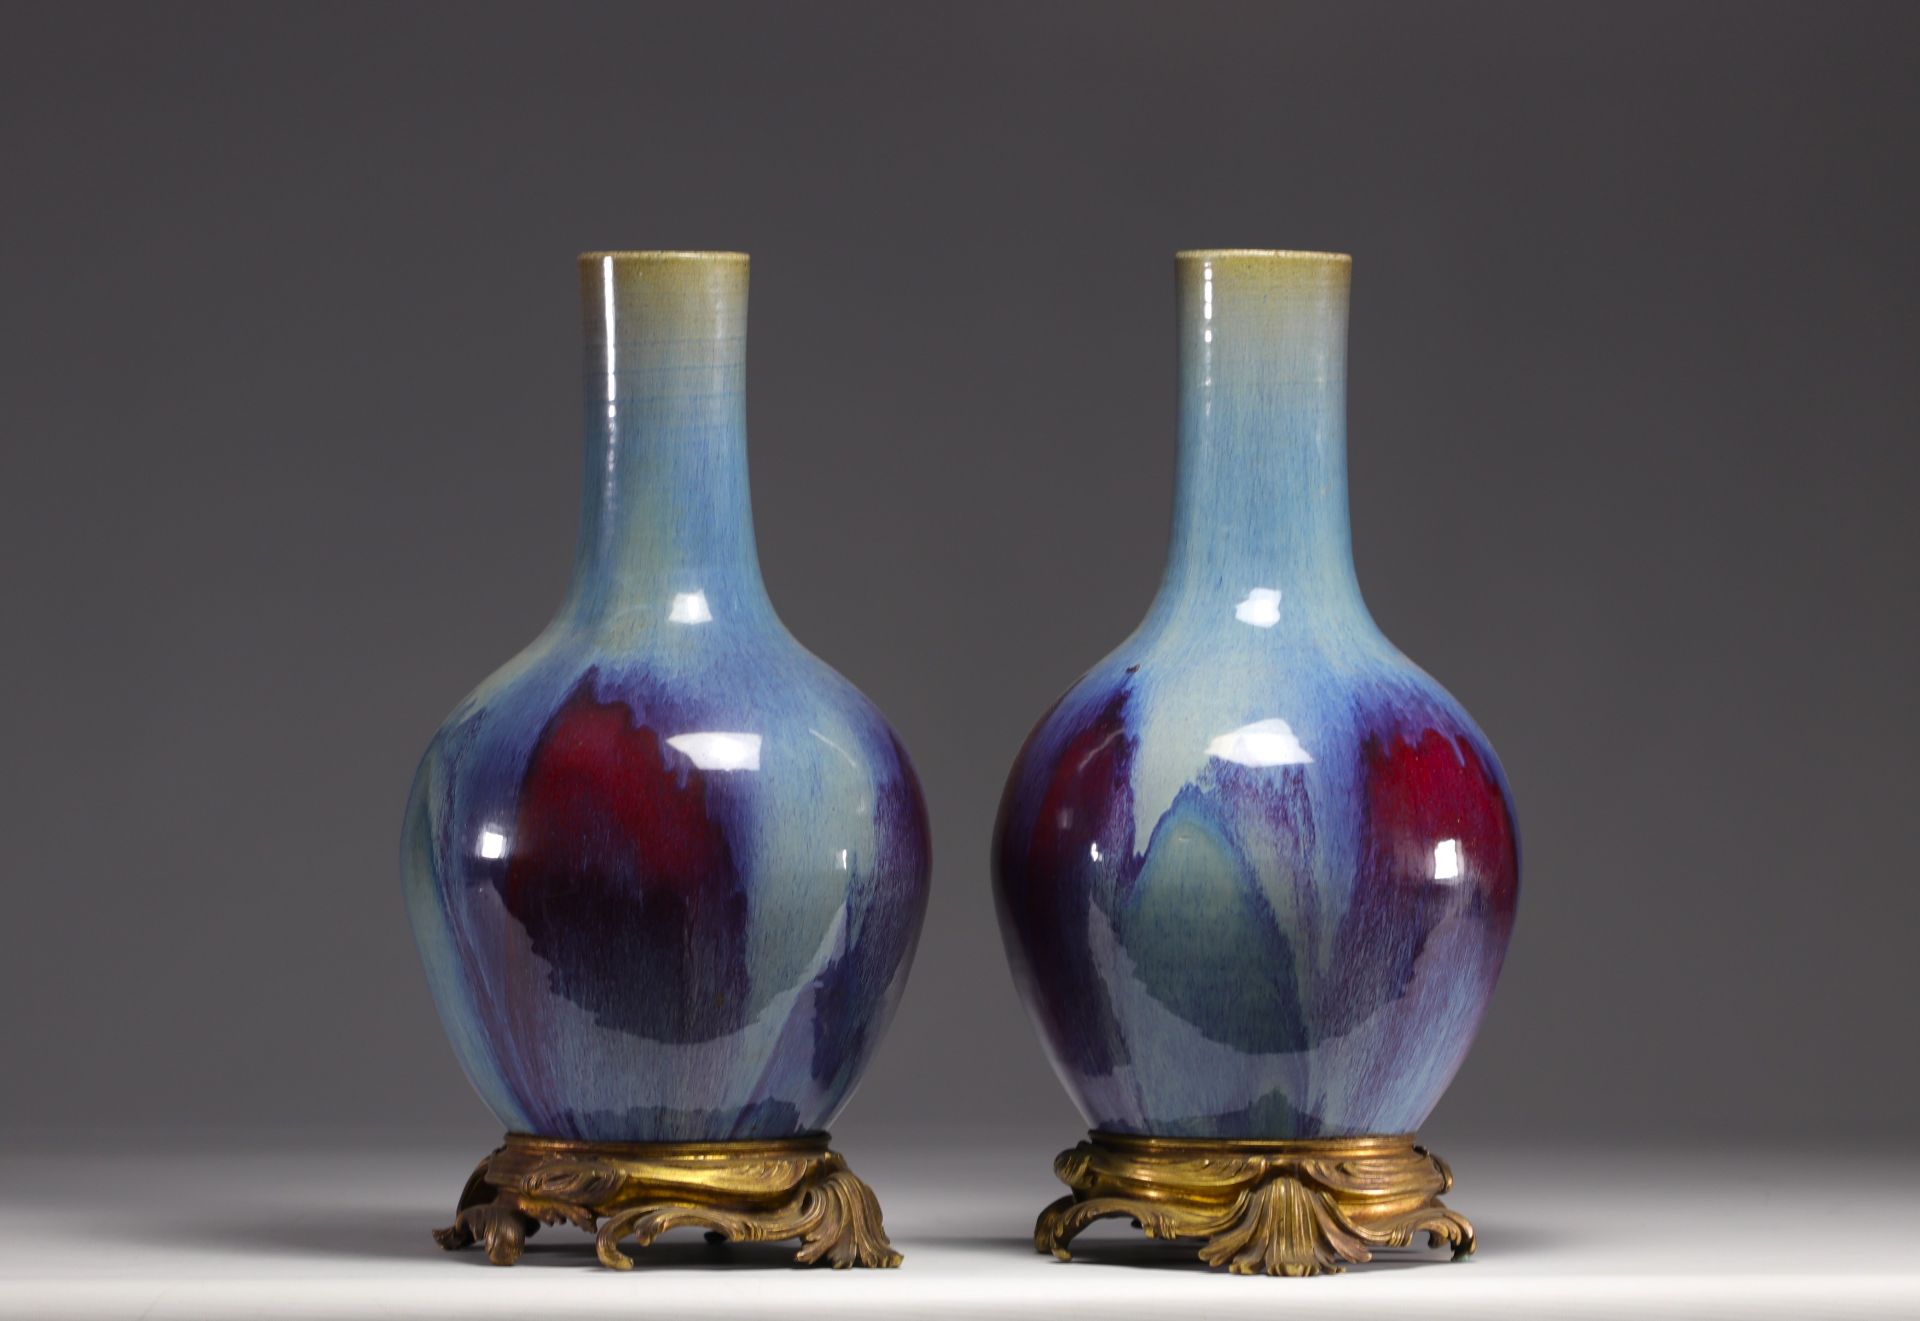 Rare pair of porcelain vases with flamed glaze mounted on bronze from 18th century - Image 2 of 5